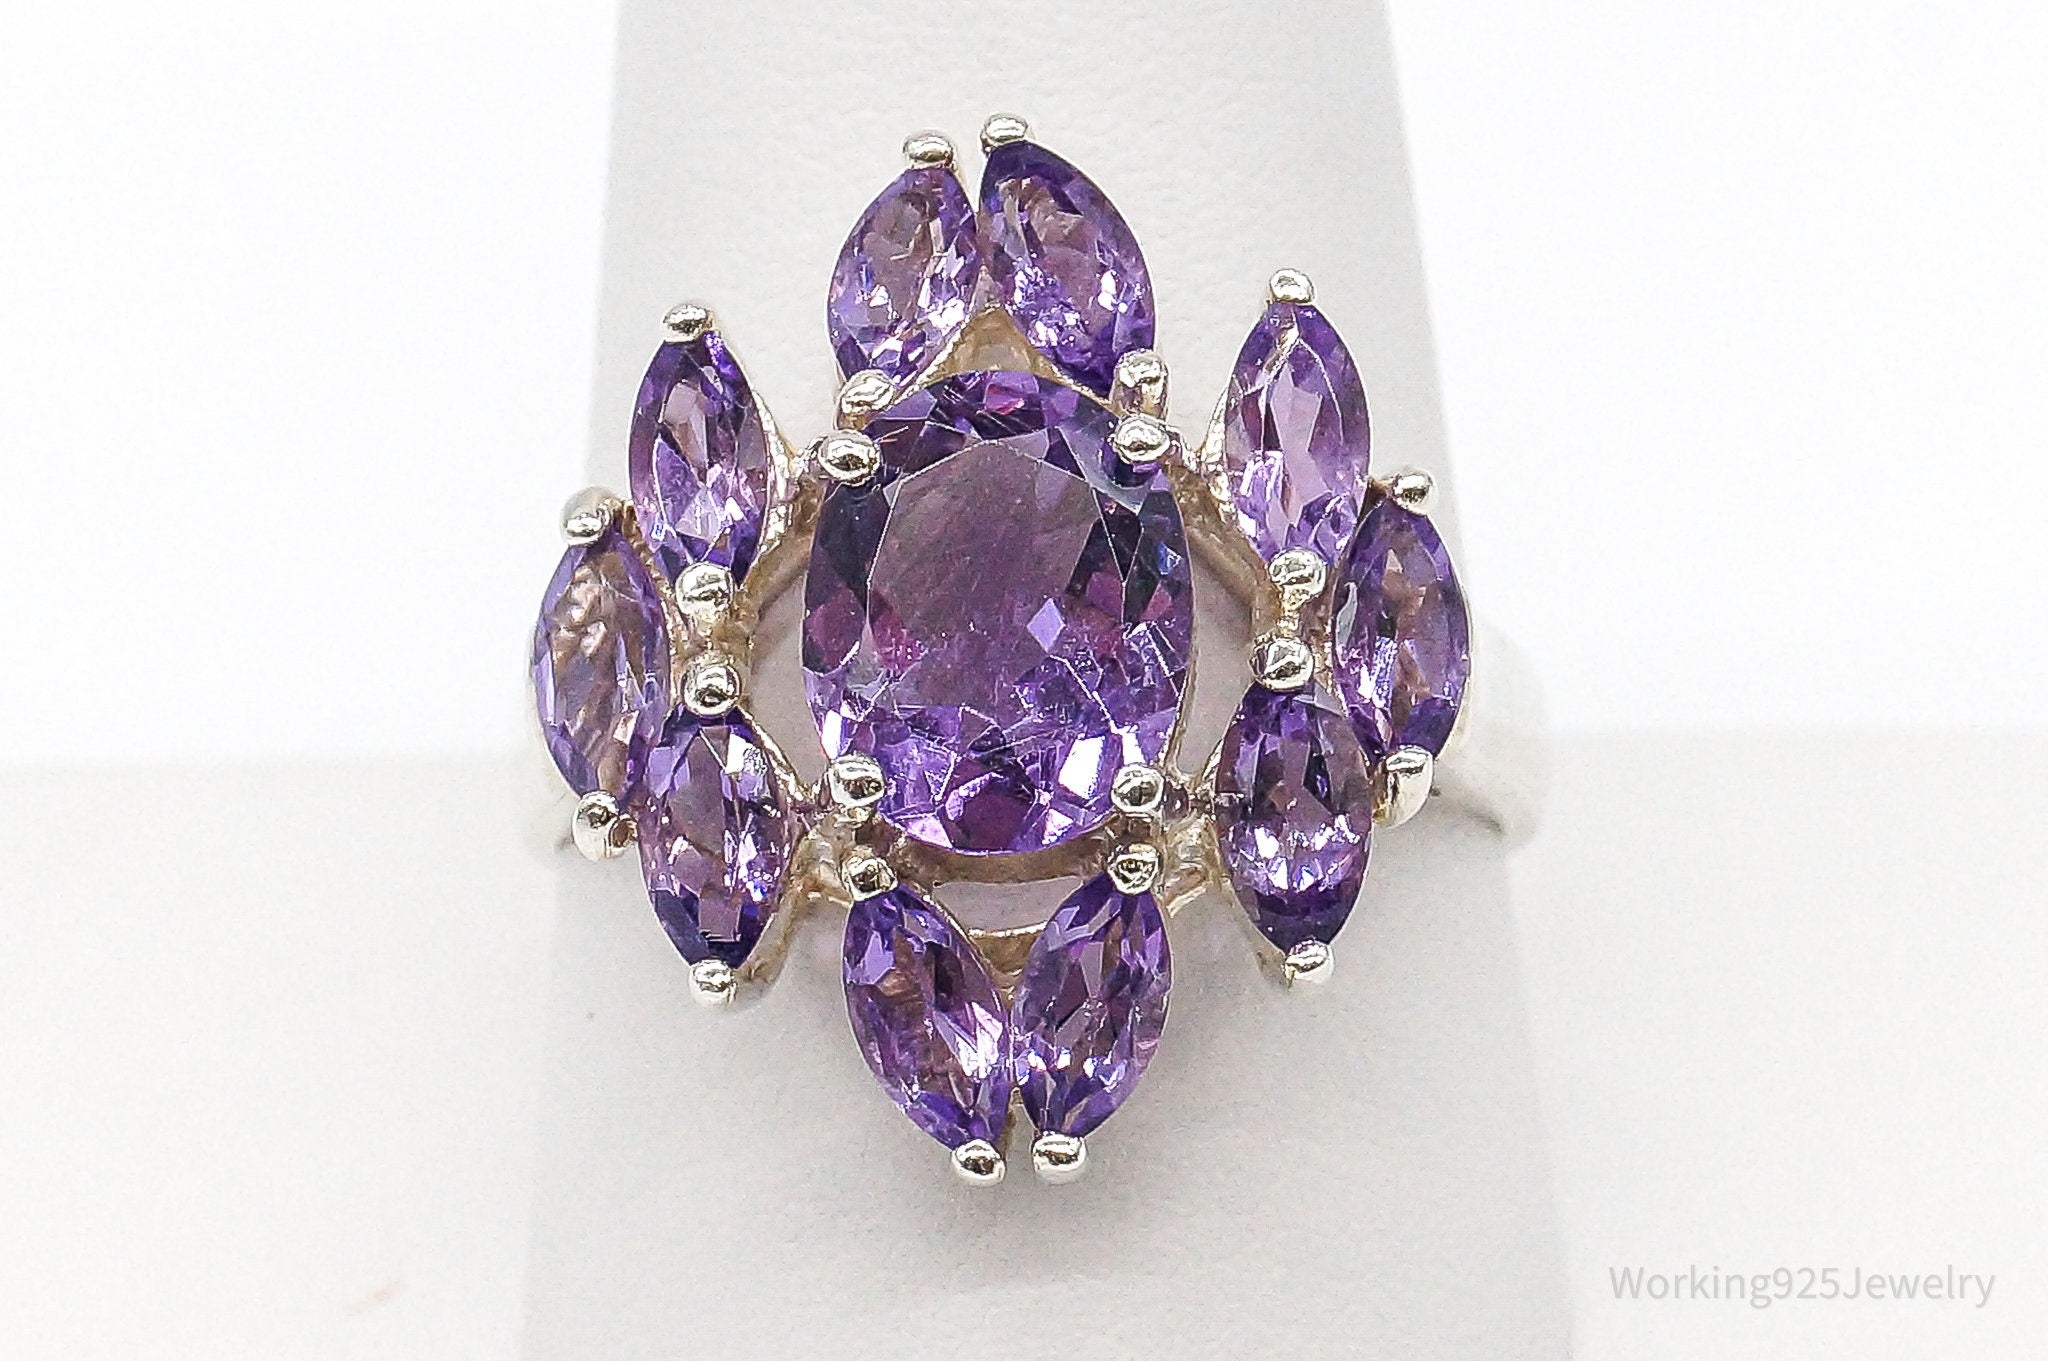 Large Amethyst Sterling Silver Ring - Size 9.75